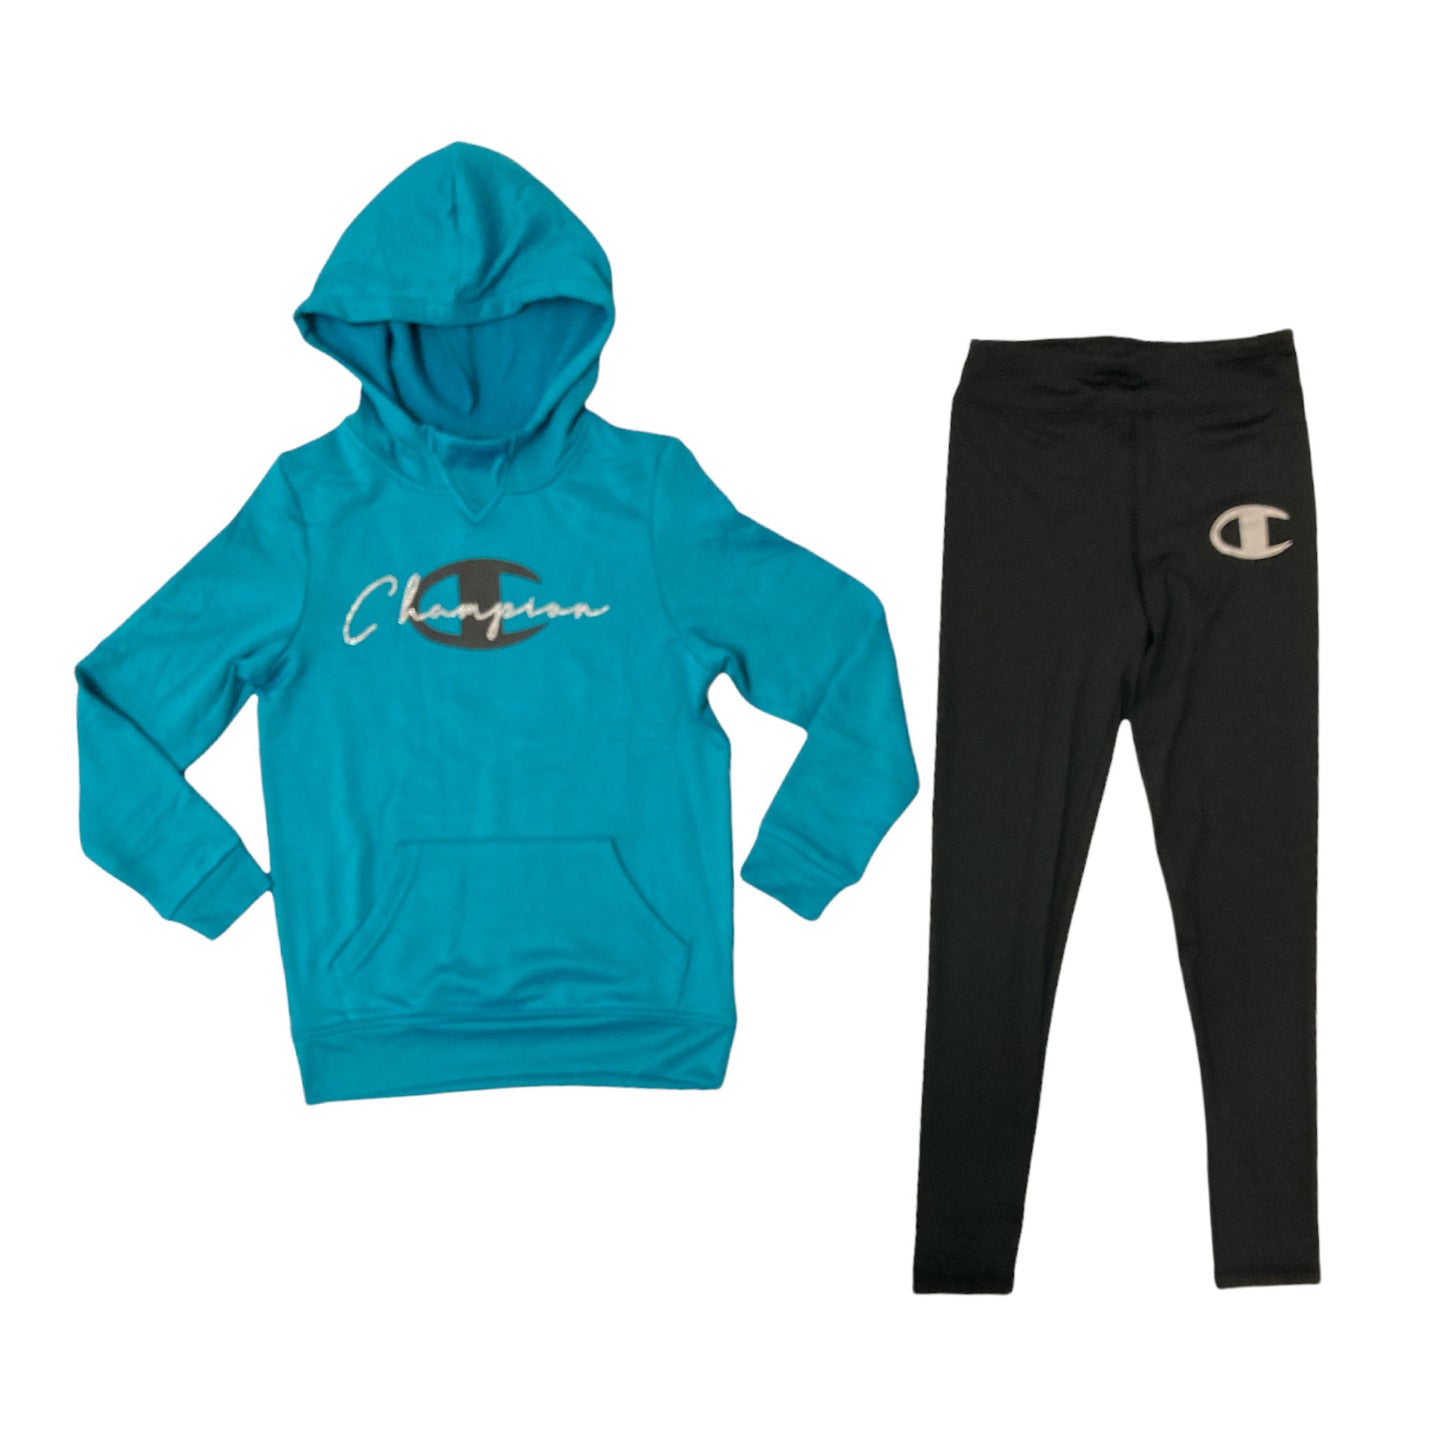 Champion Girls' Heavyweight Pullover Logo Hoodie & Leggings Outfit Set